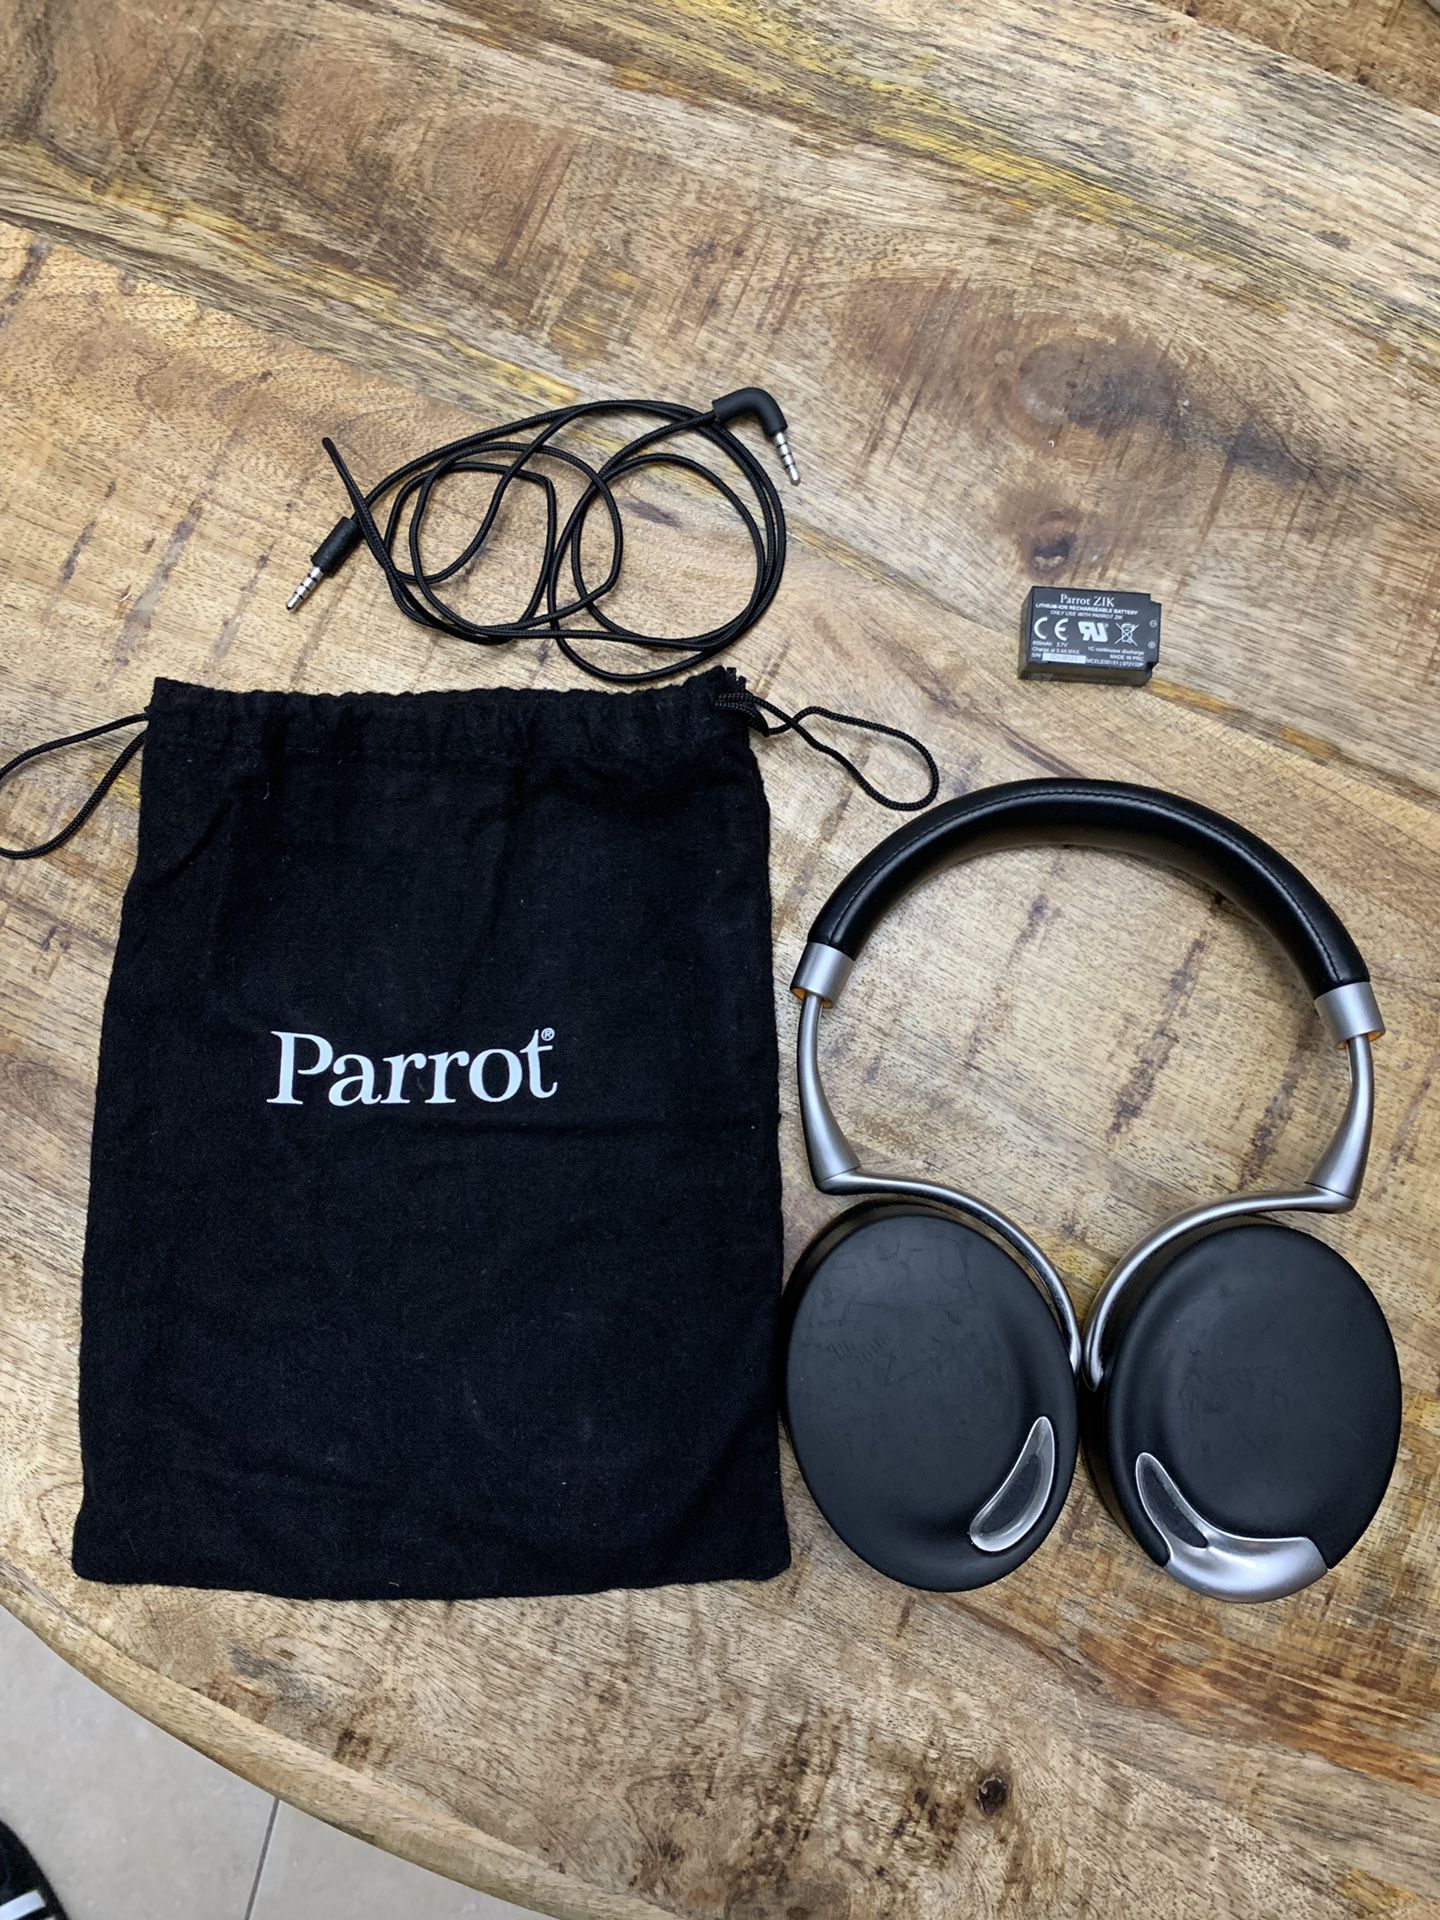 Parrot Zic noise reduction/wireless